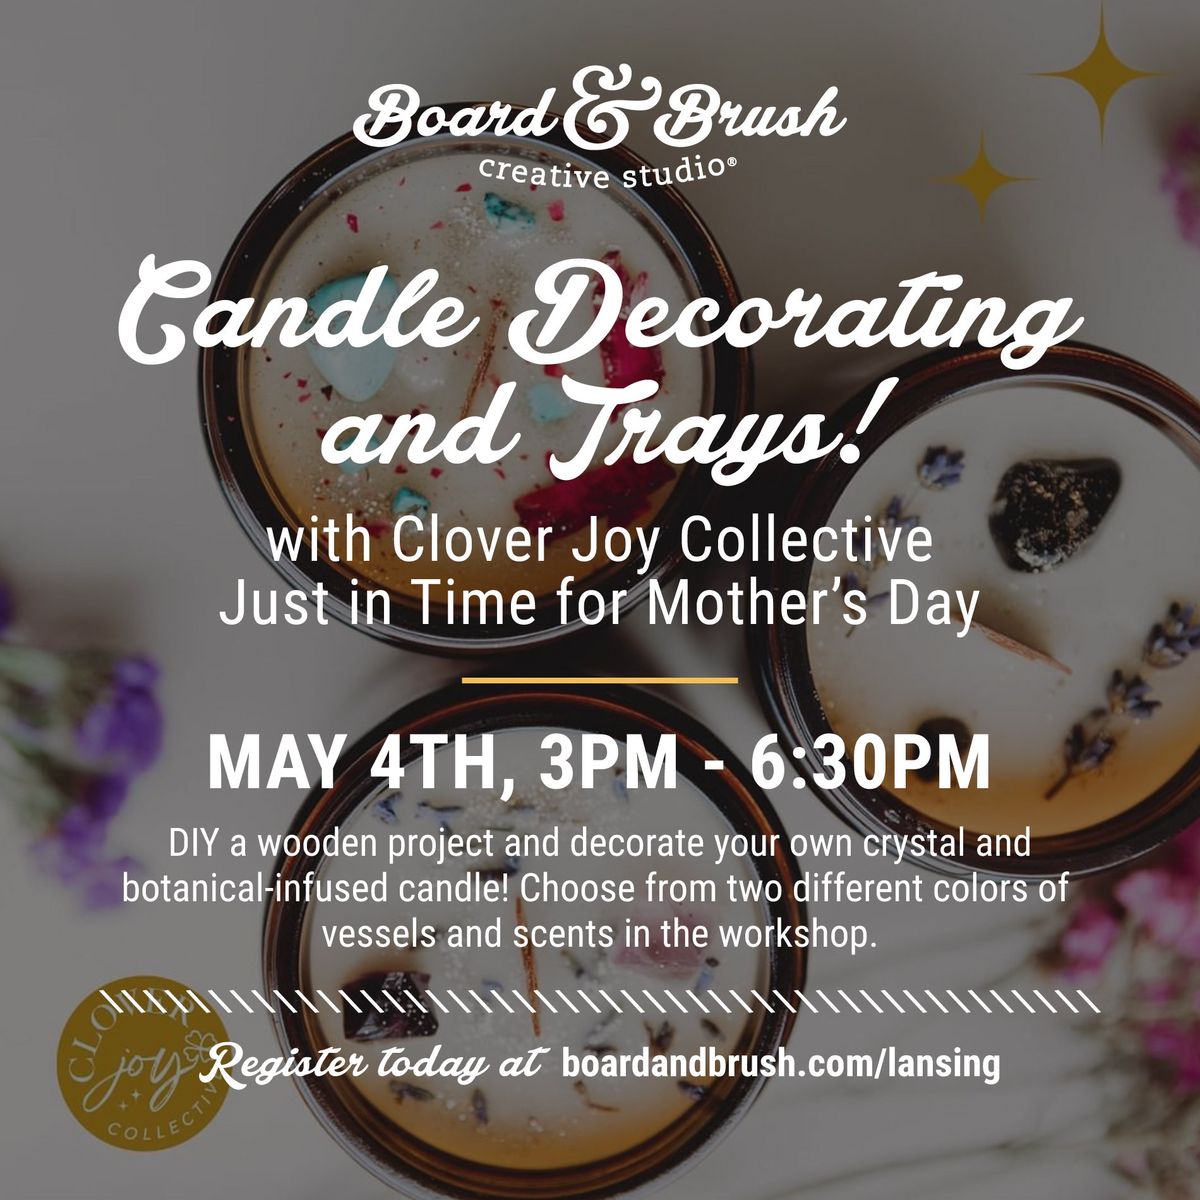 DIY Workshop with Candle Decorating from Clover Joy Collective